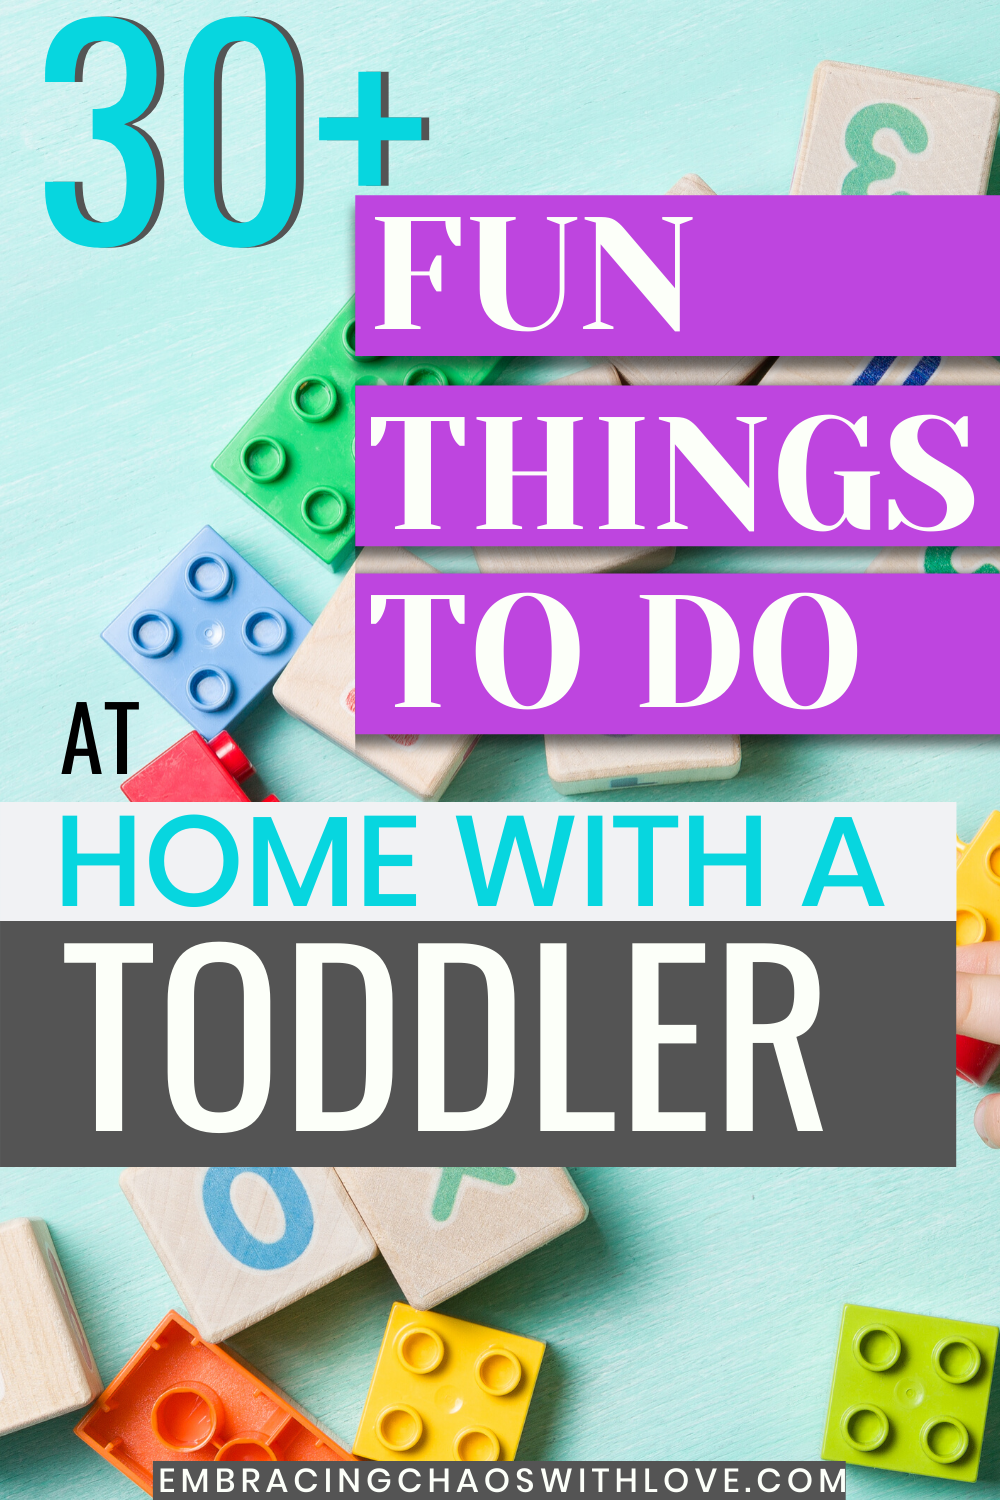 activities-to-do-with-toddlers-at-home-embracing-chaos-with-love